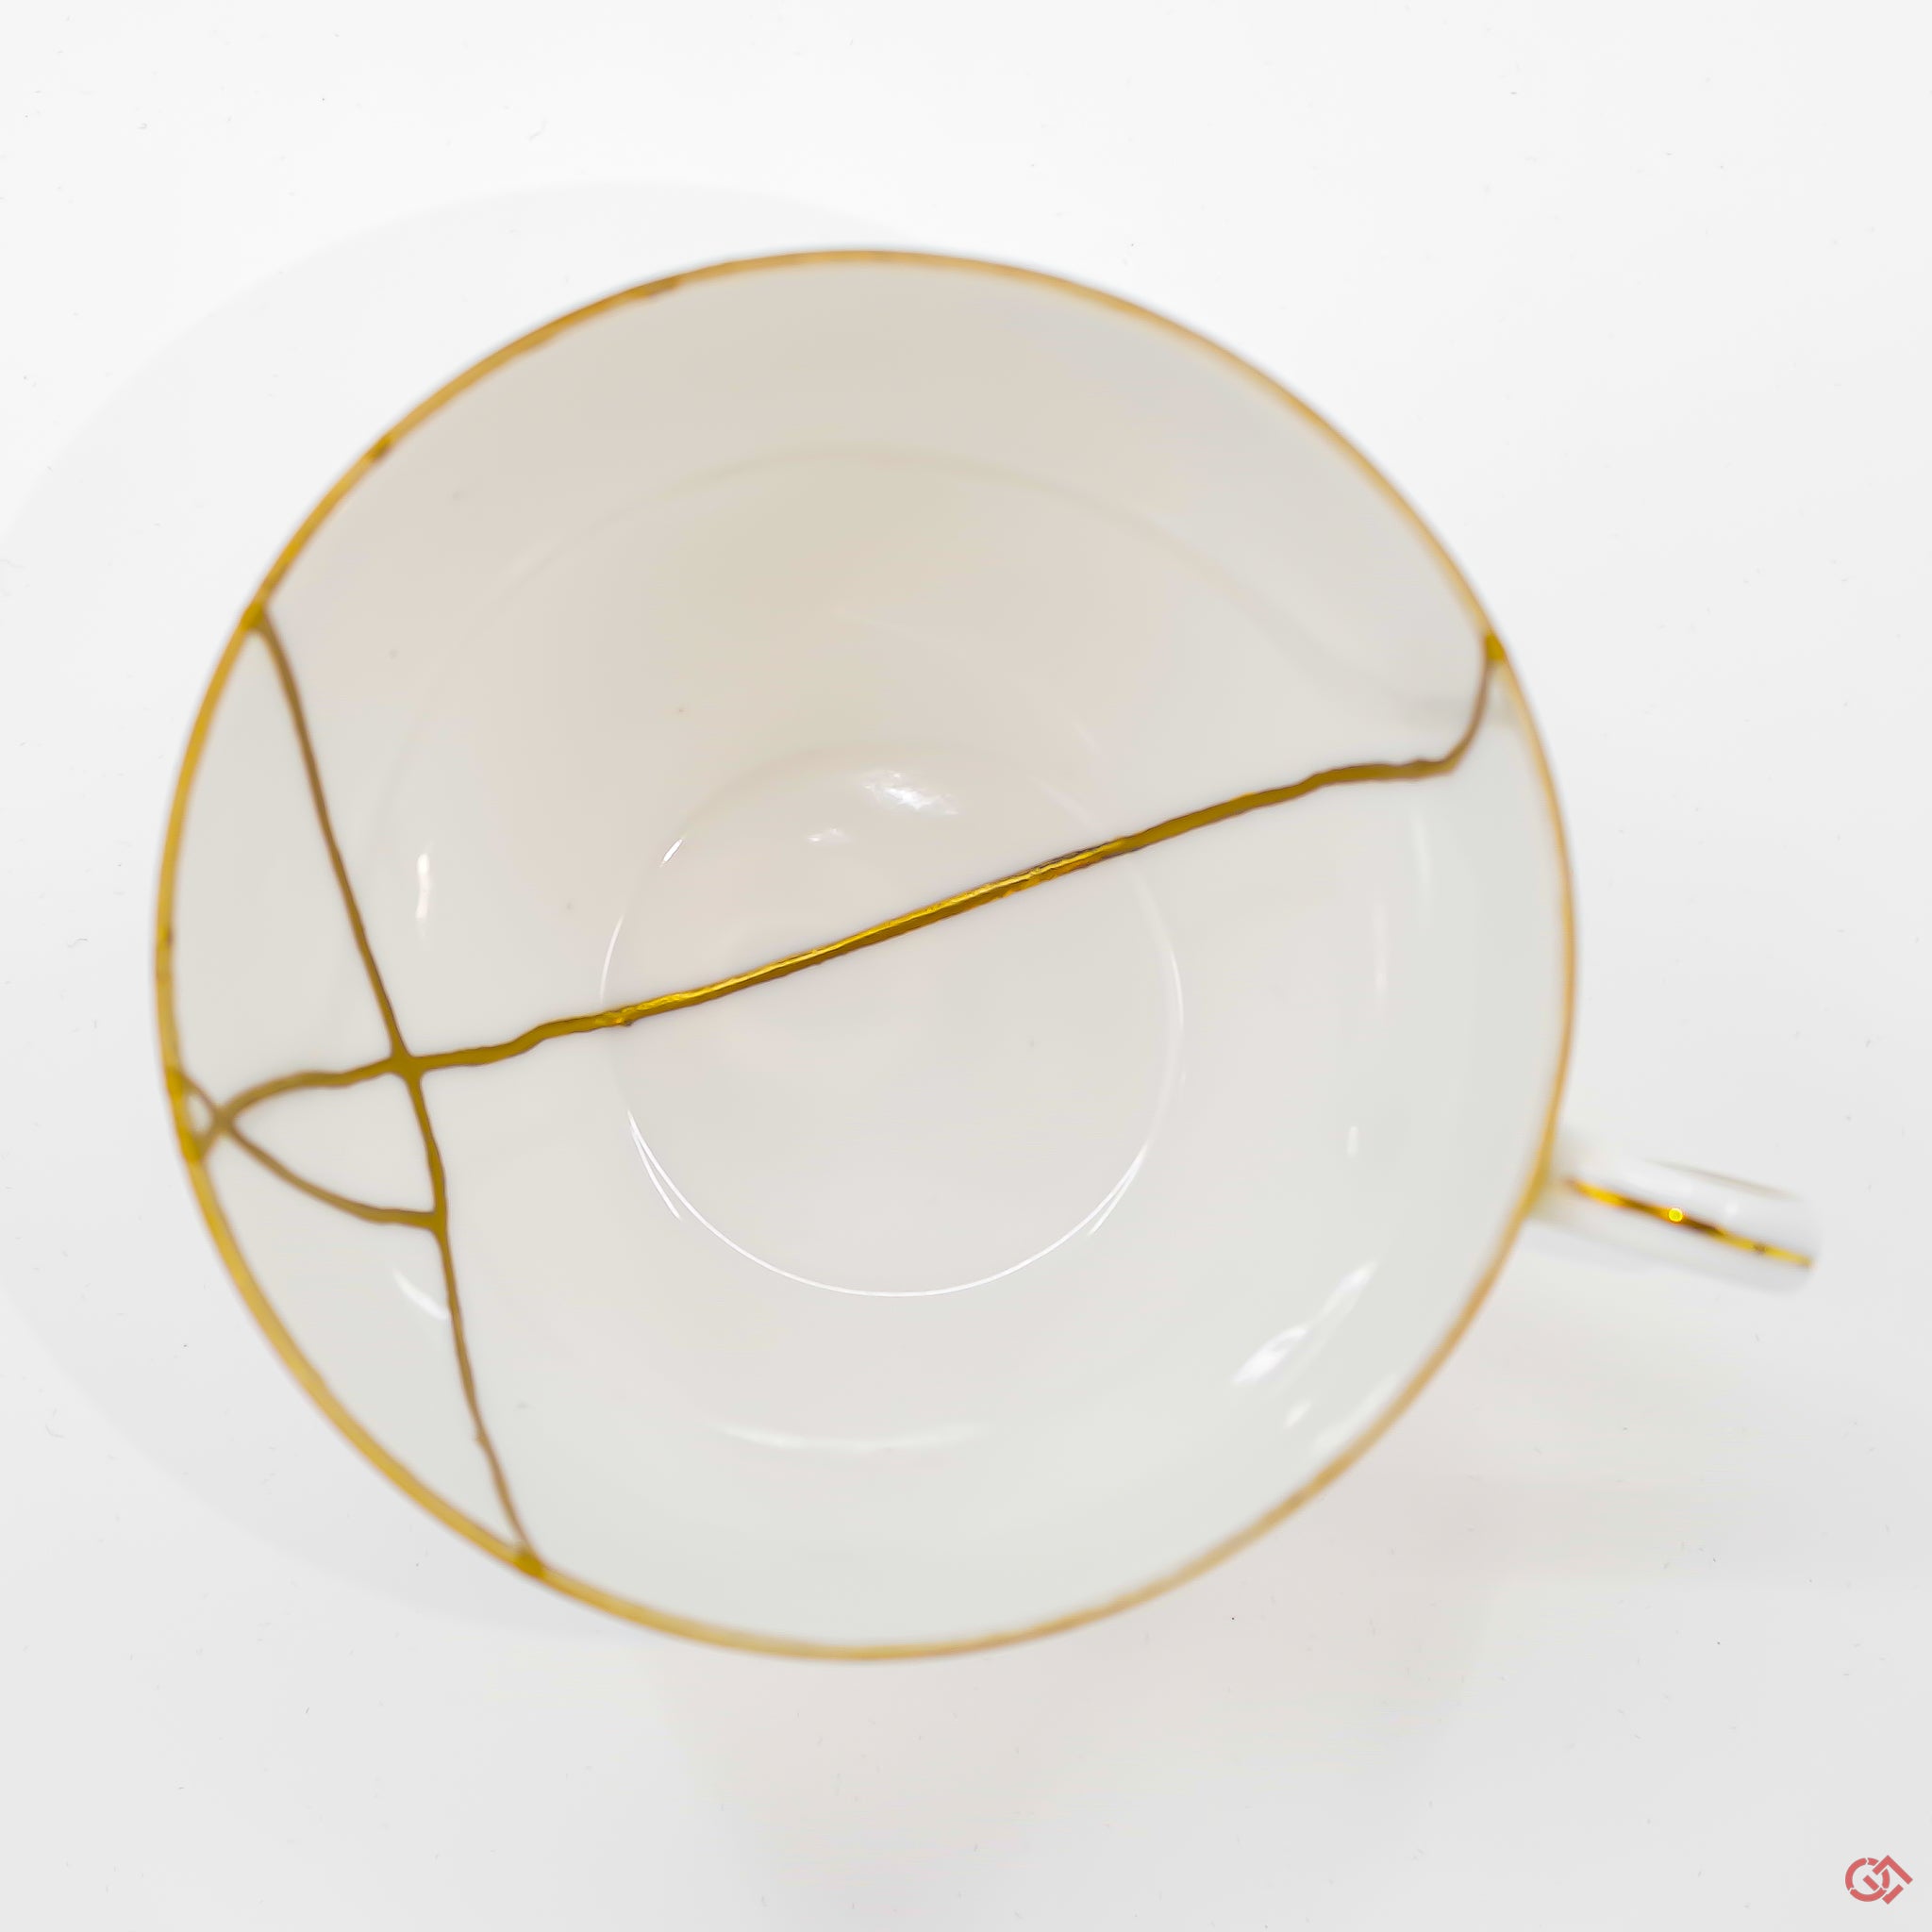 A photo of the top of an authentic Kintsugi pottery piece, showing its overall design and features.